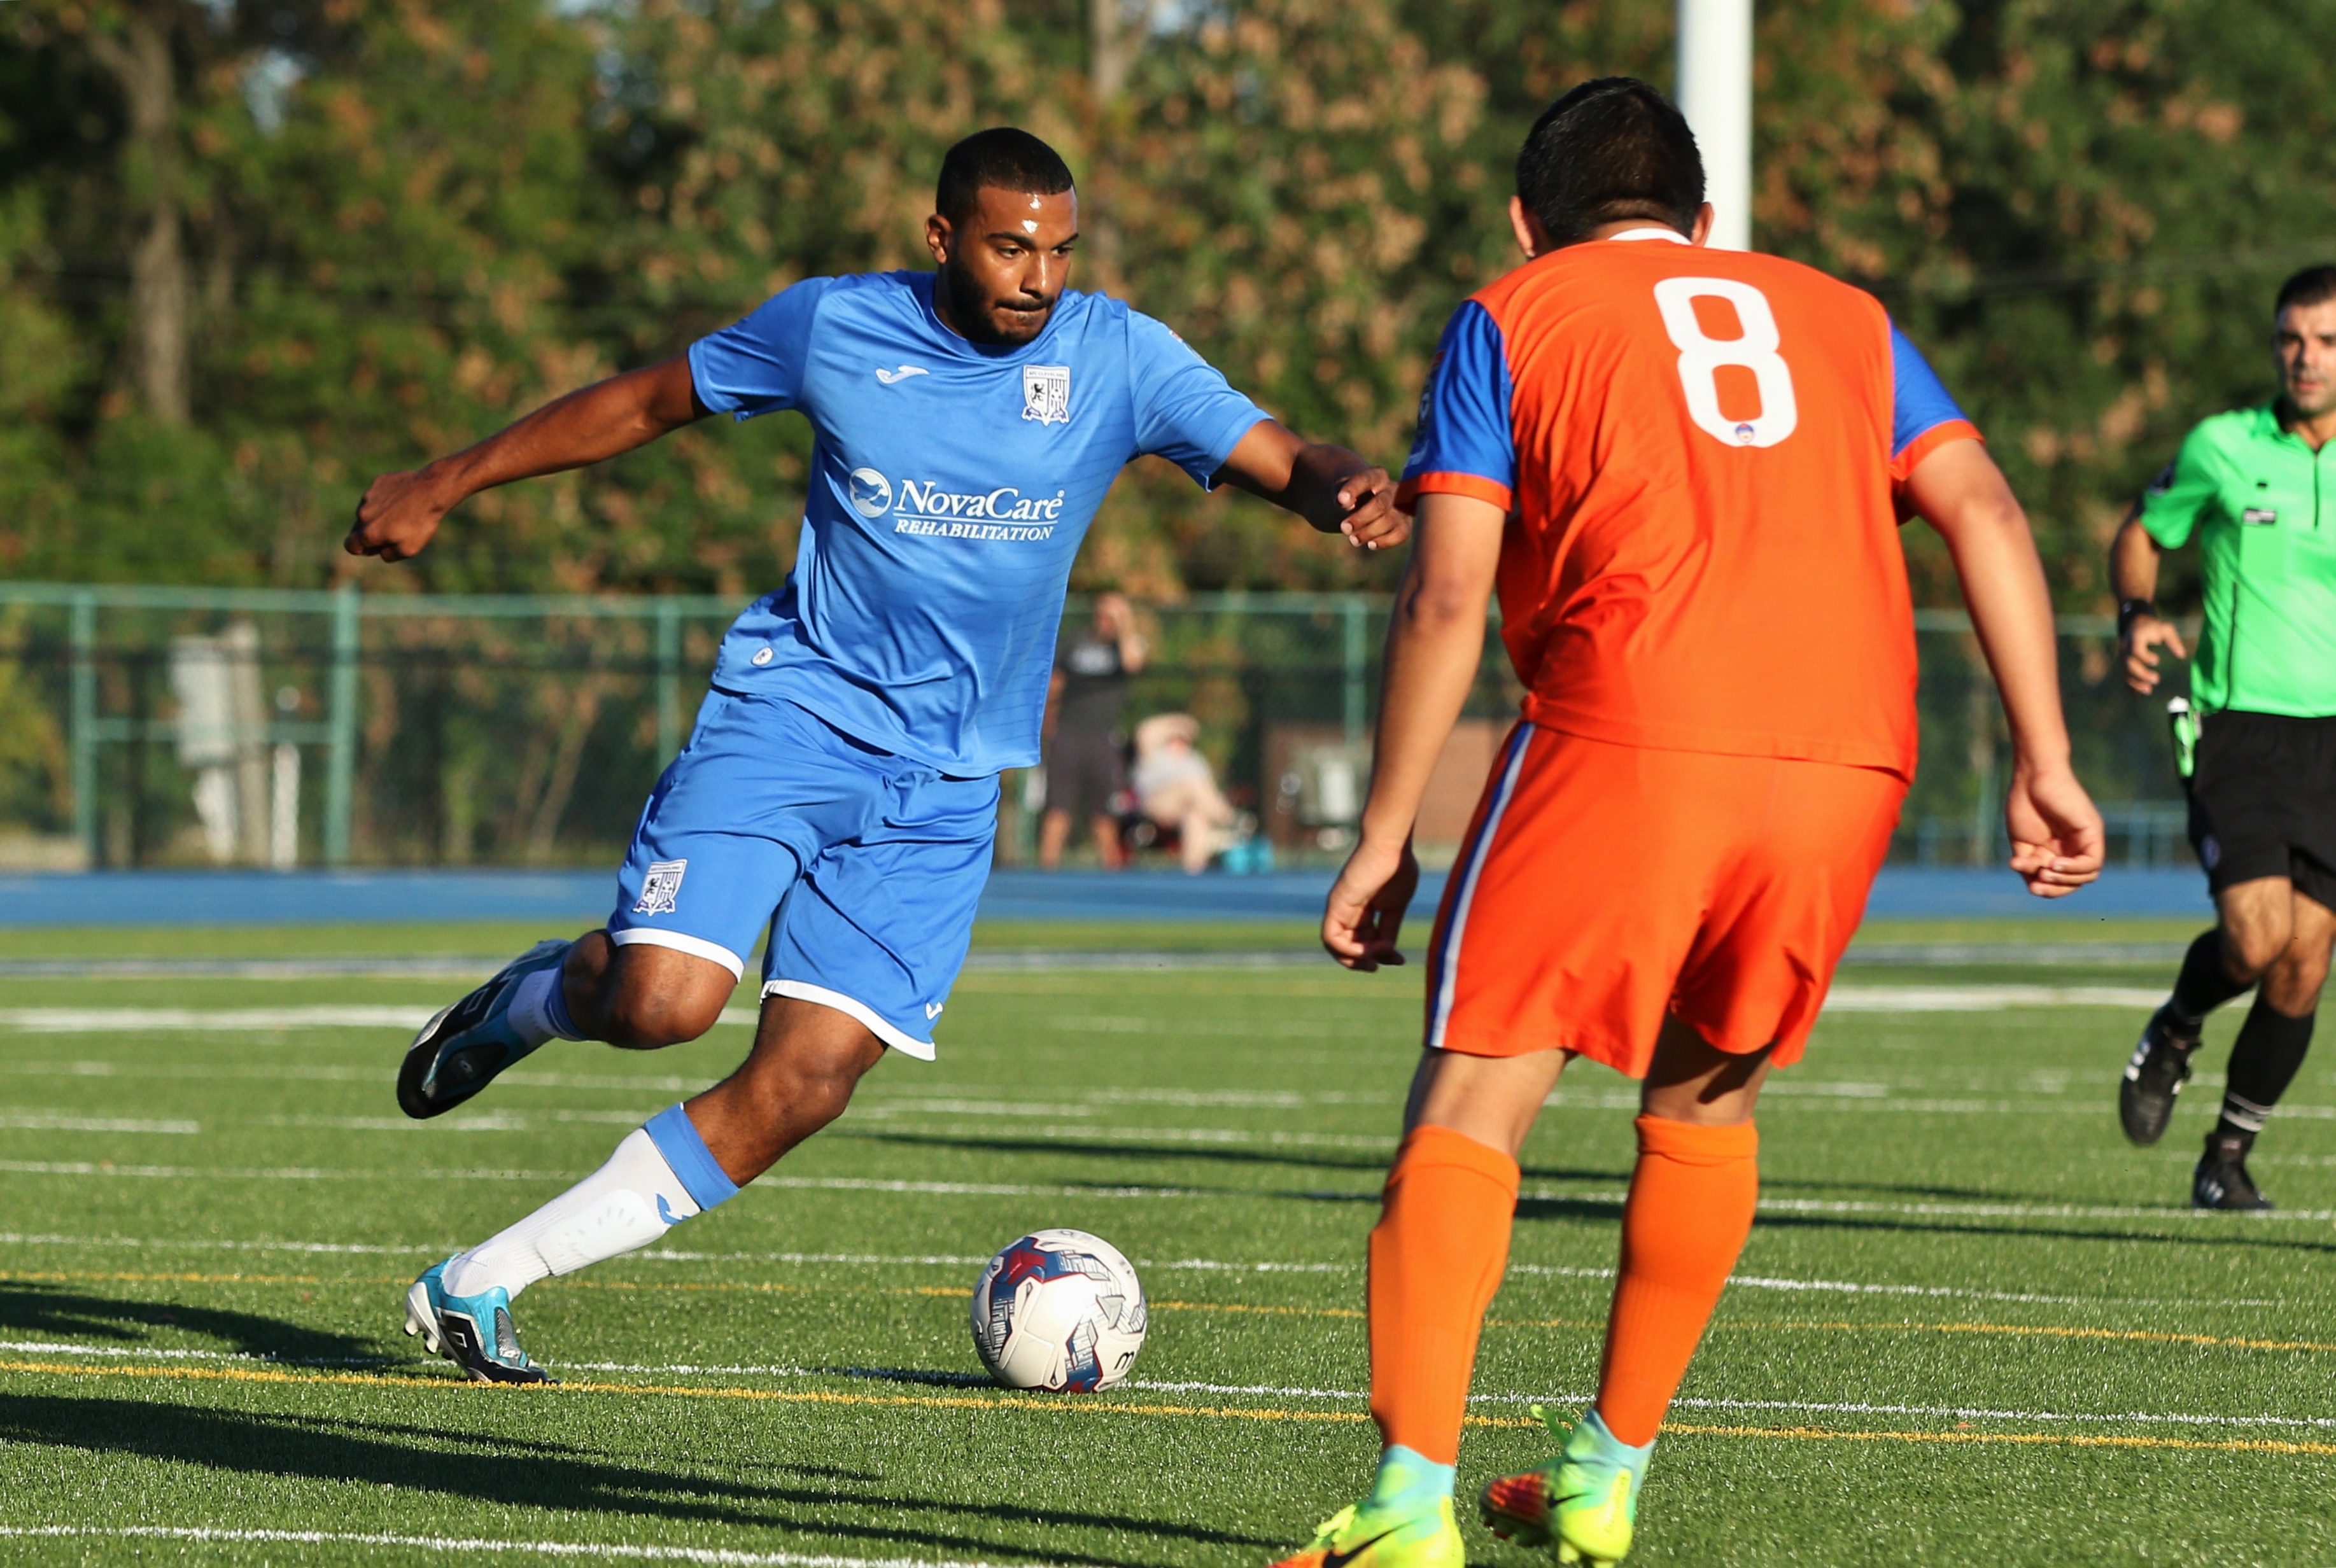 NPSL Soccer News: AFC Cleveland Top Sonoma County Sol to Win NPSL National Championship